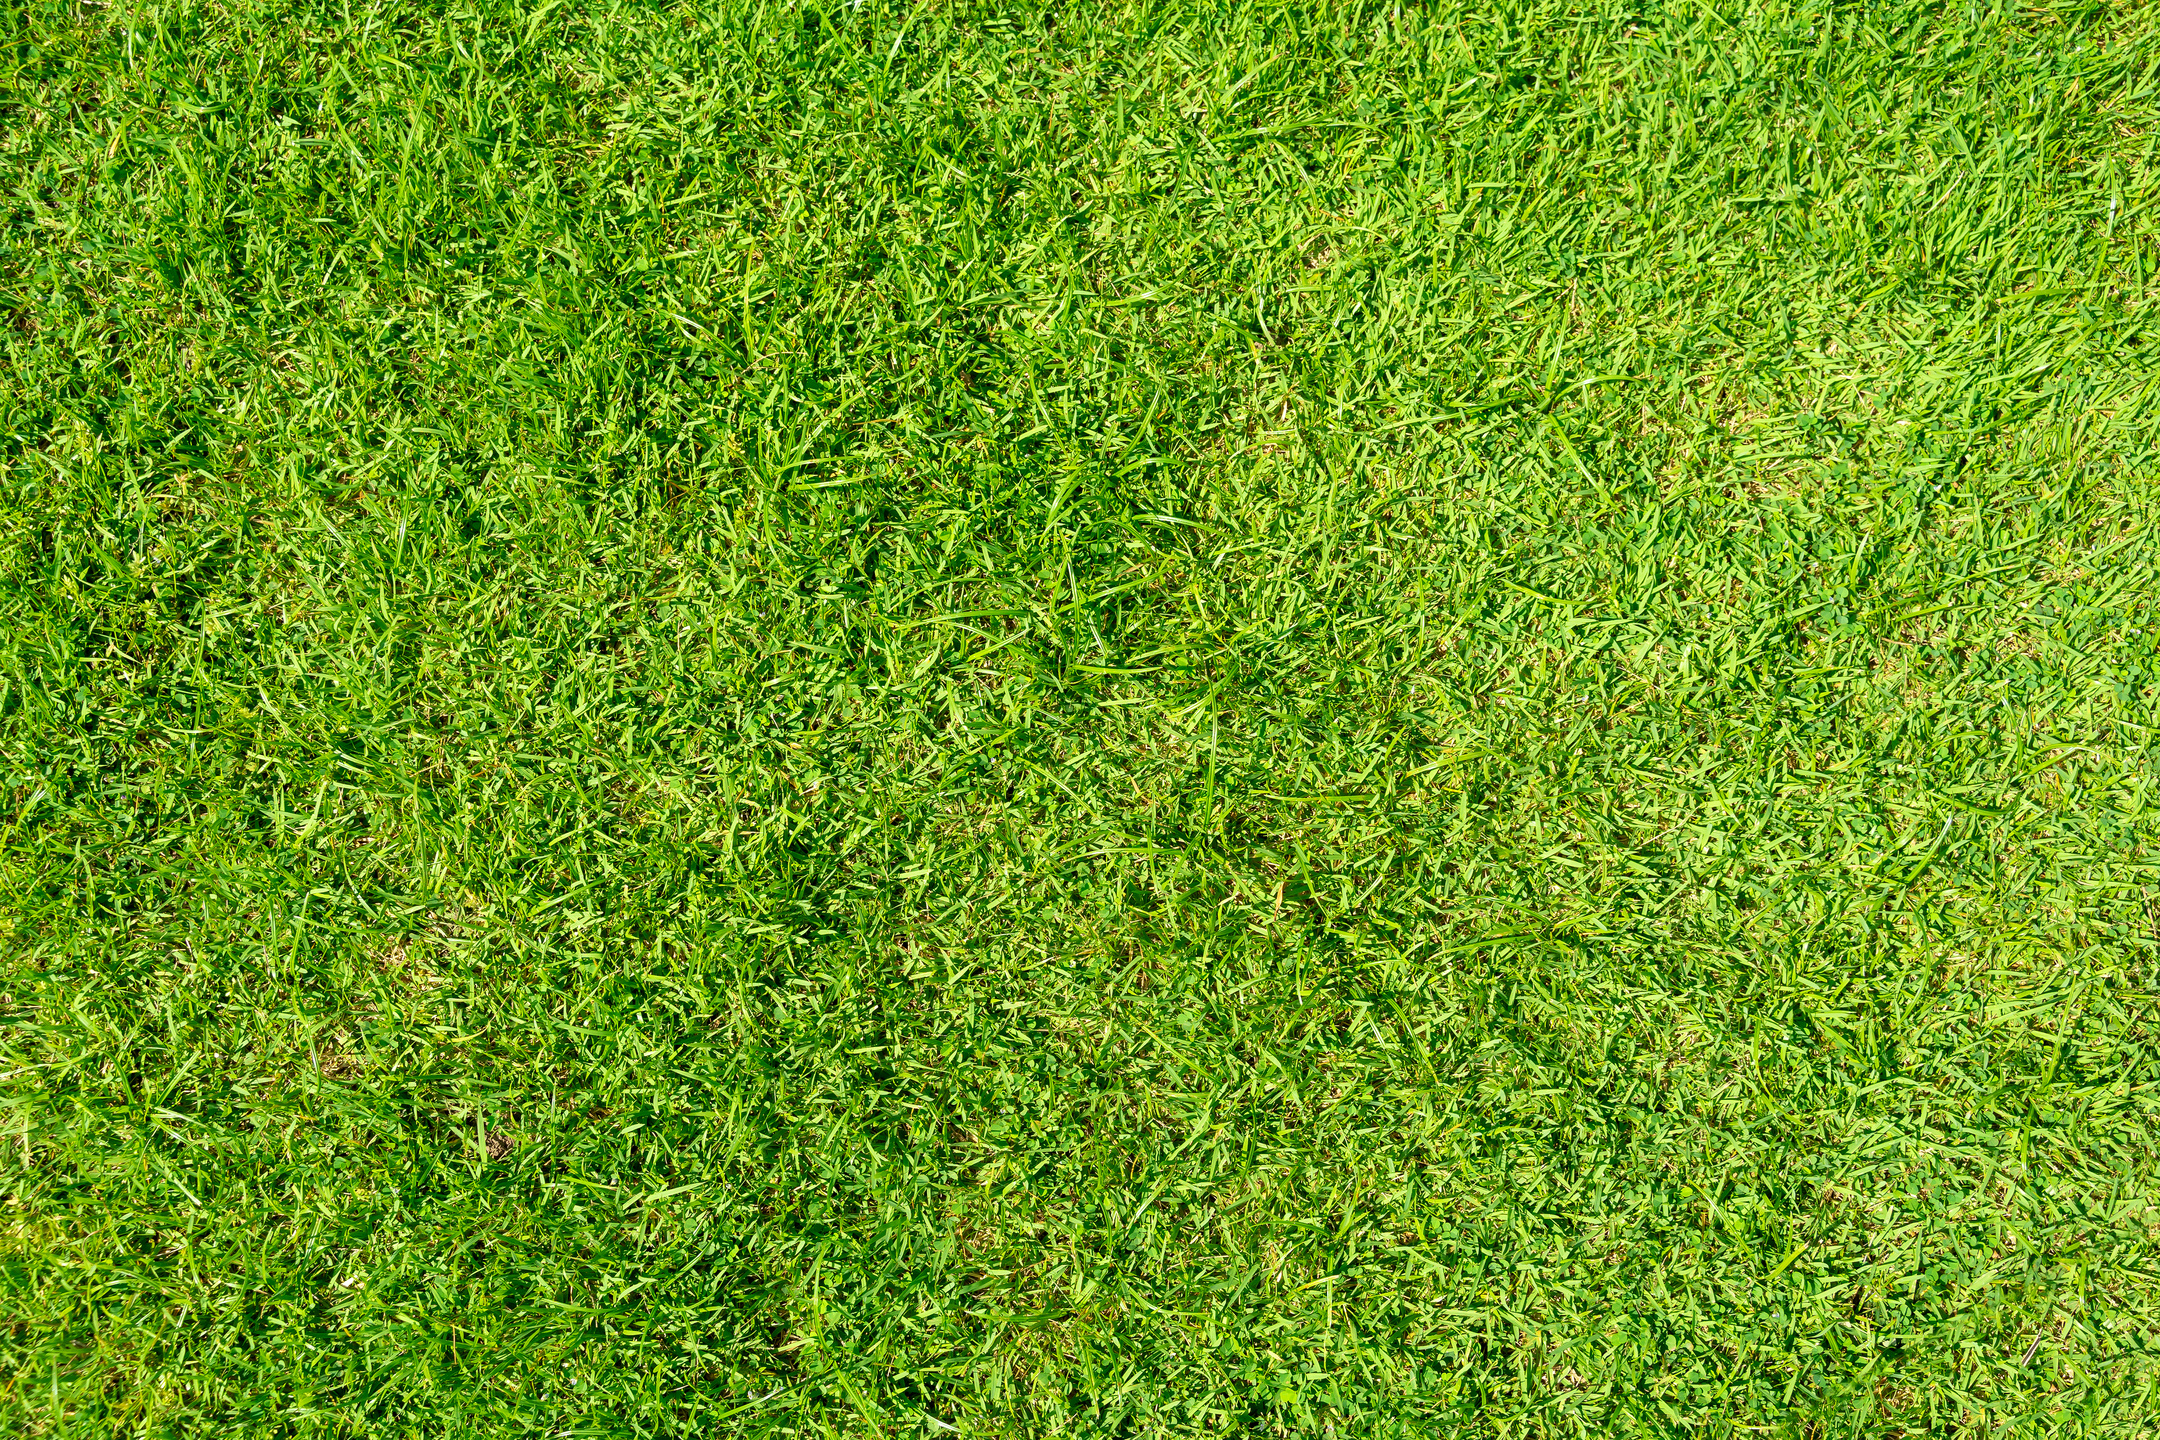  Green Grass Is Used to Make Sports Fields